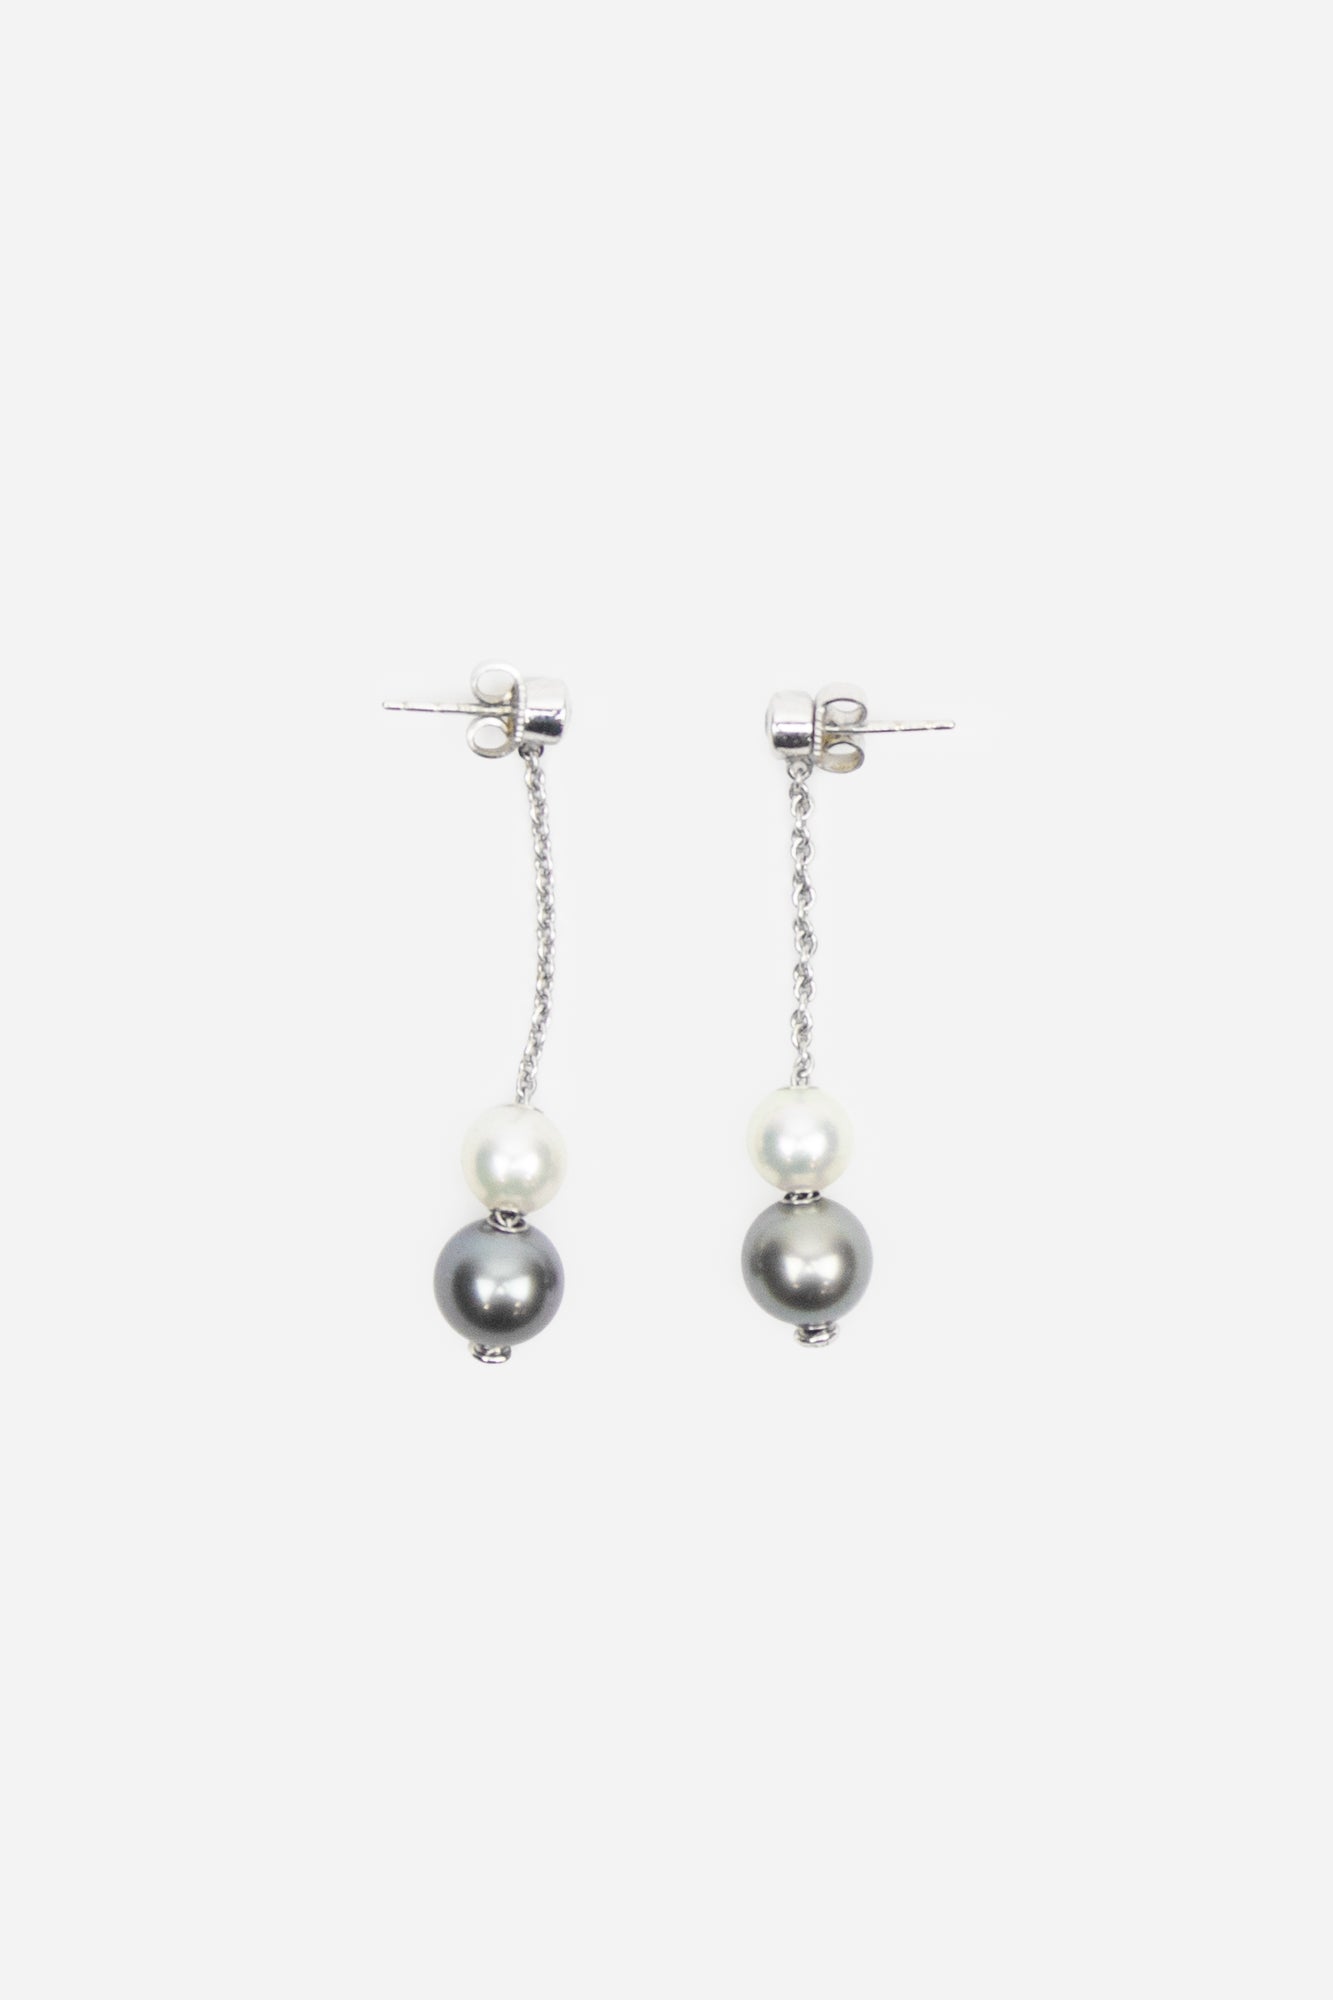 Grey and White Pearls in Motion Dangle Earrings